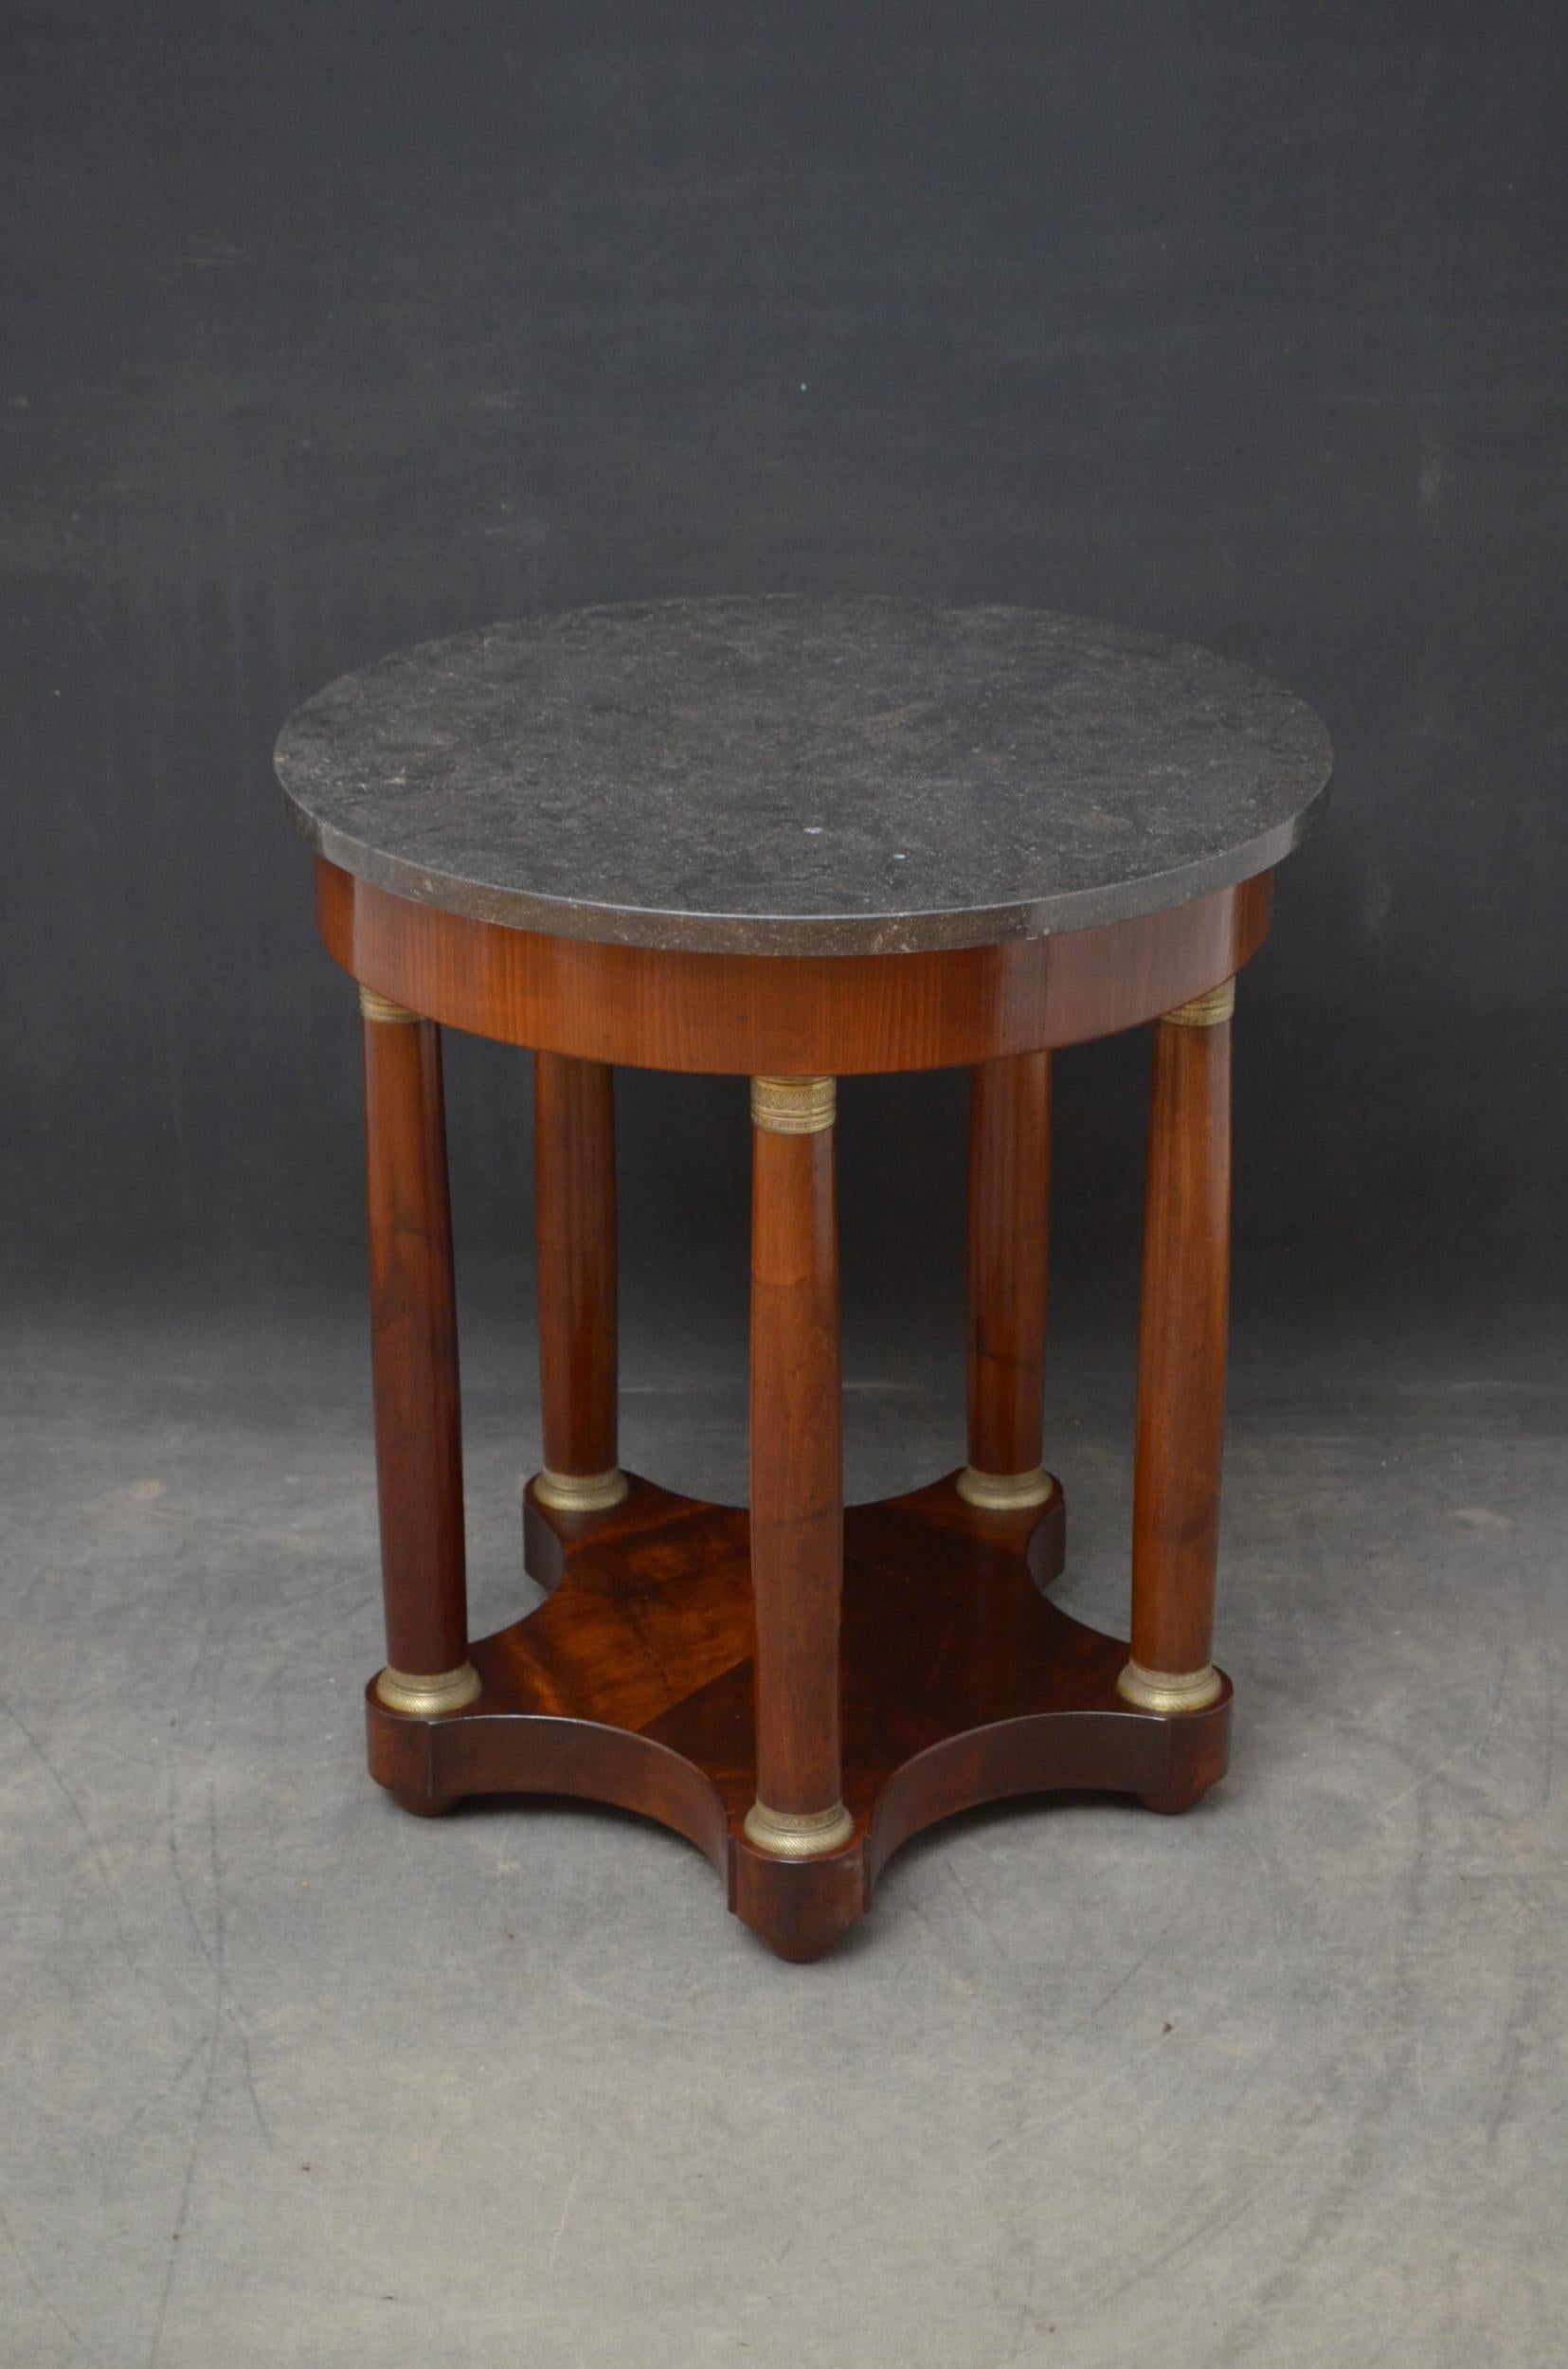 19th Century Gueridon Table in Mahogany In Good Condition For Sale In Whaley Bridge, GB